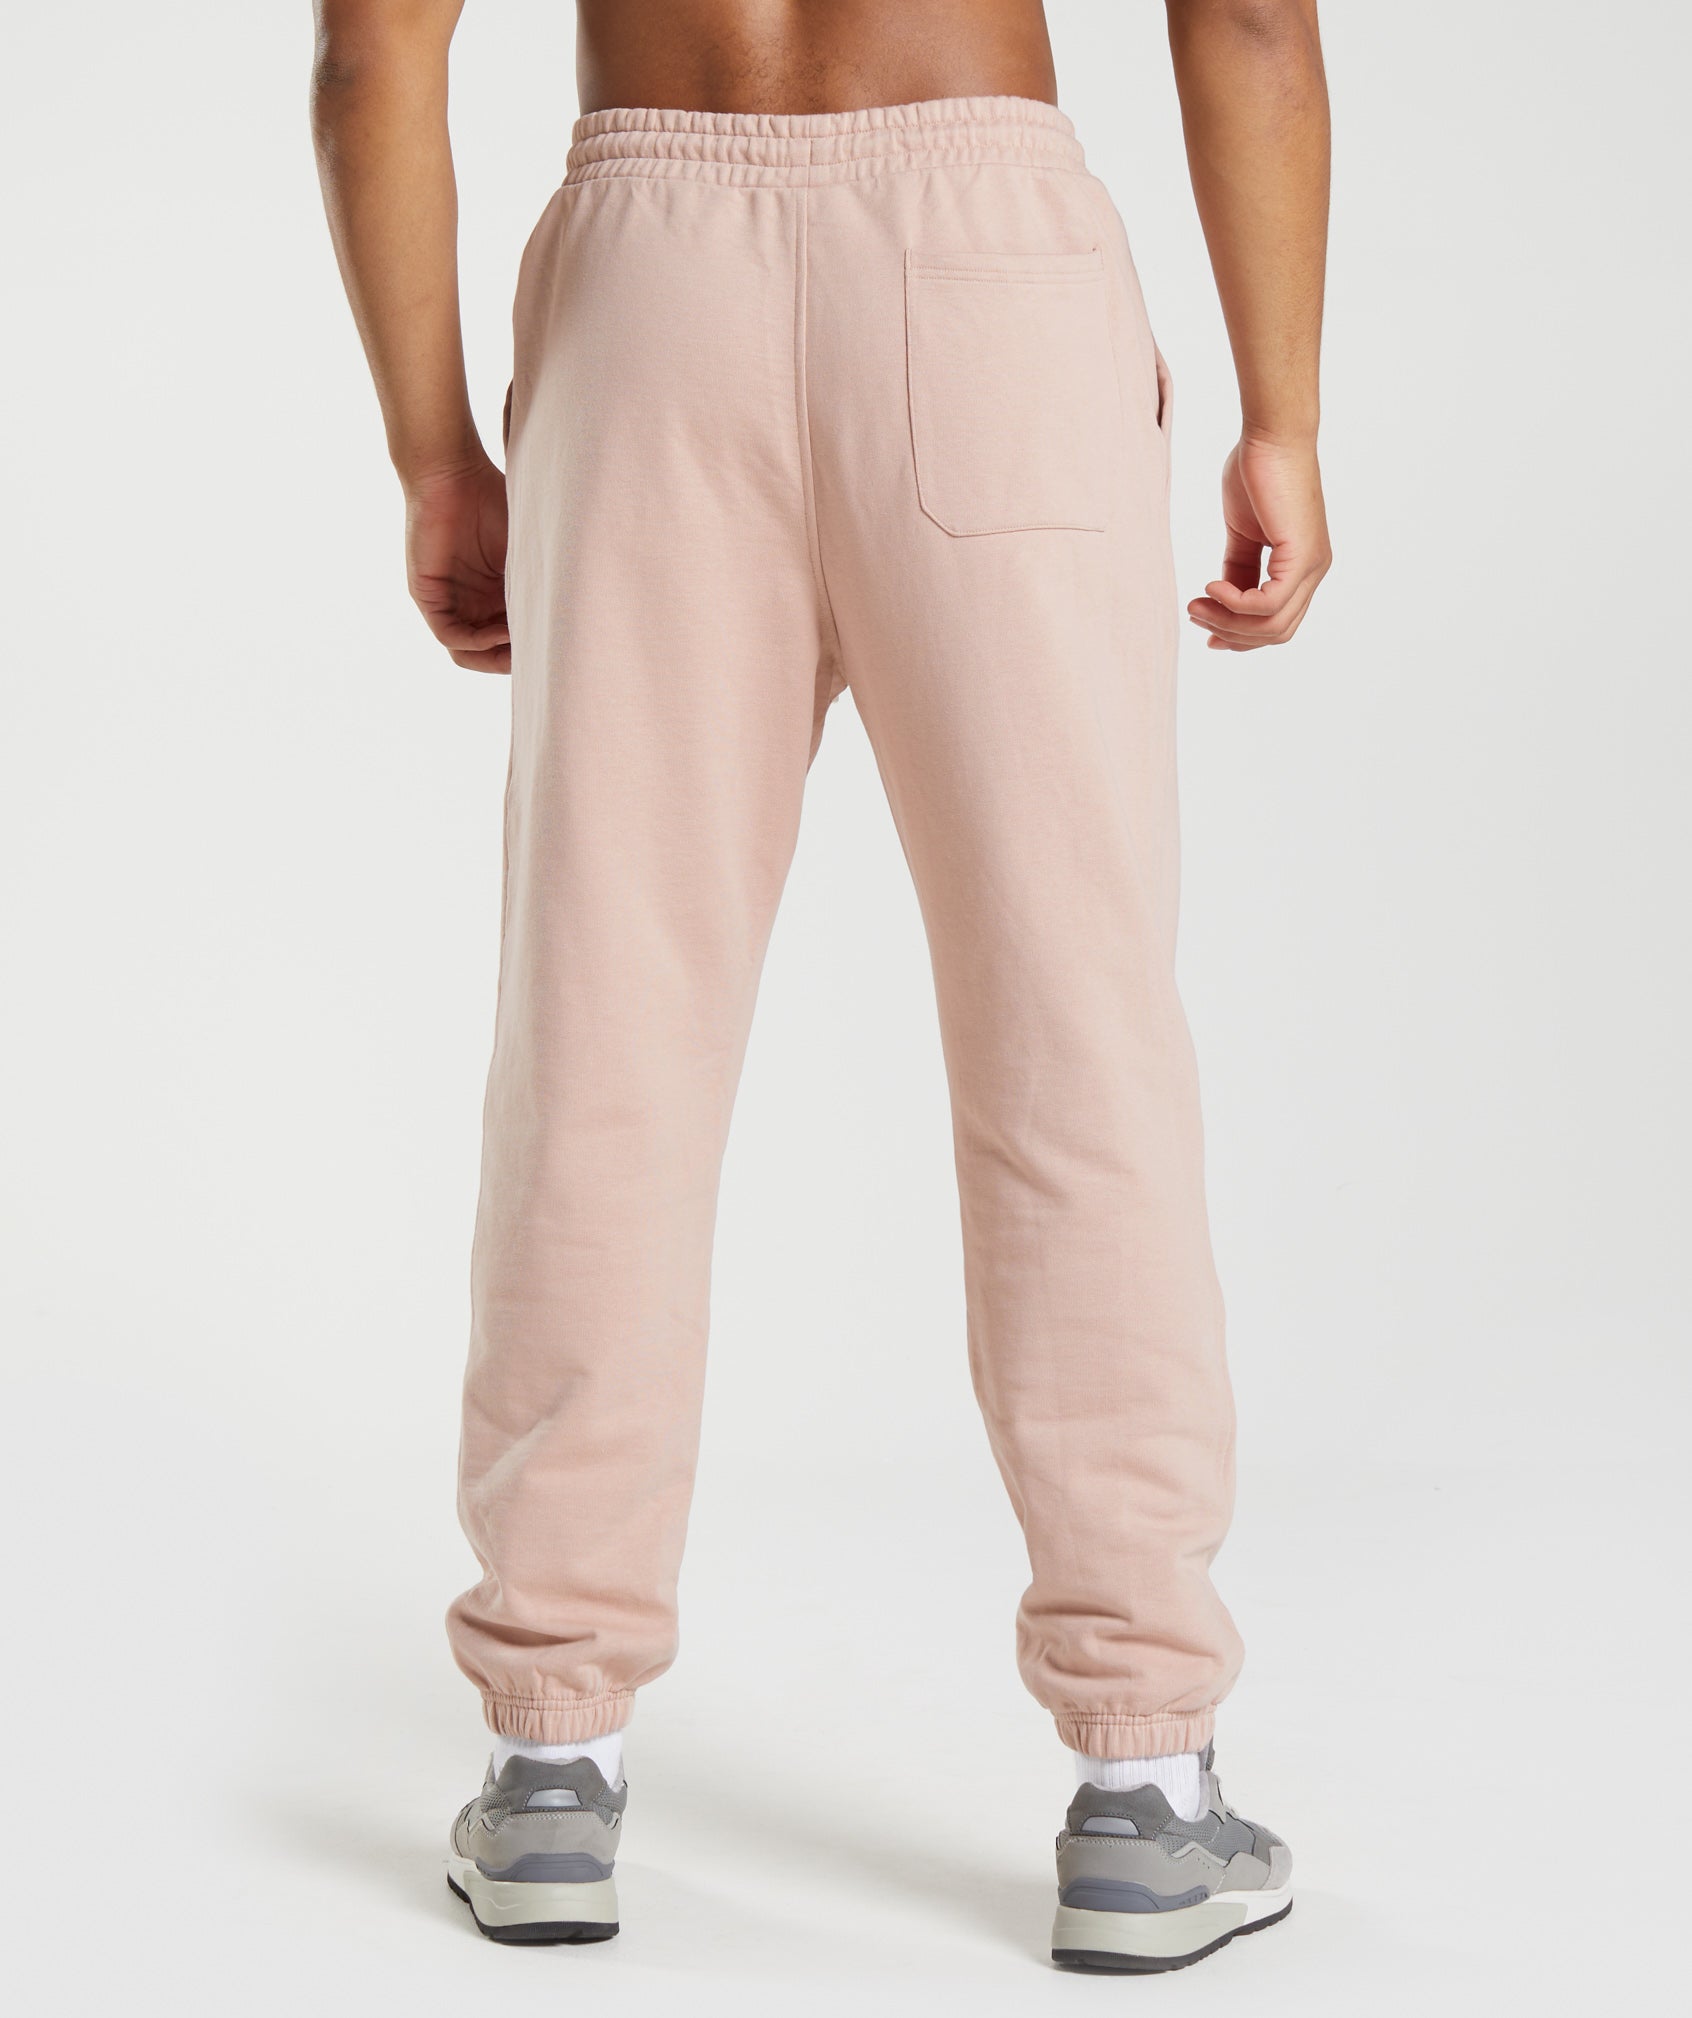 Rest Day Sweats Joggers in Dusty Taupe - view 5